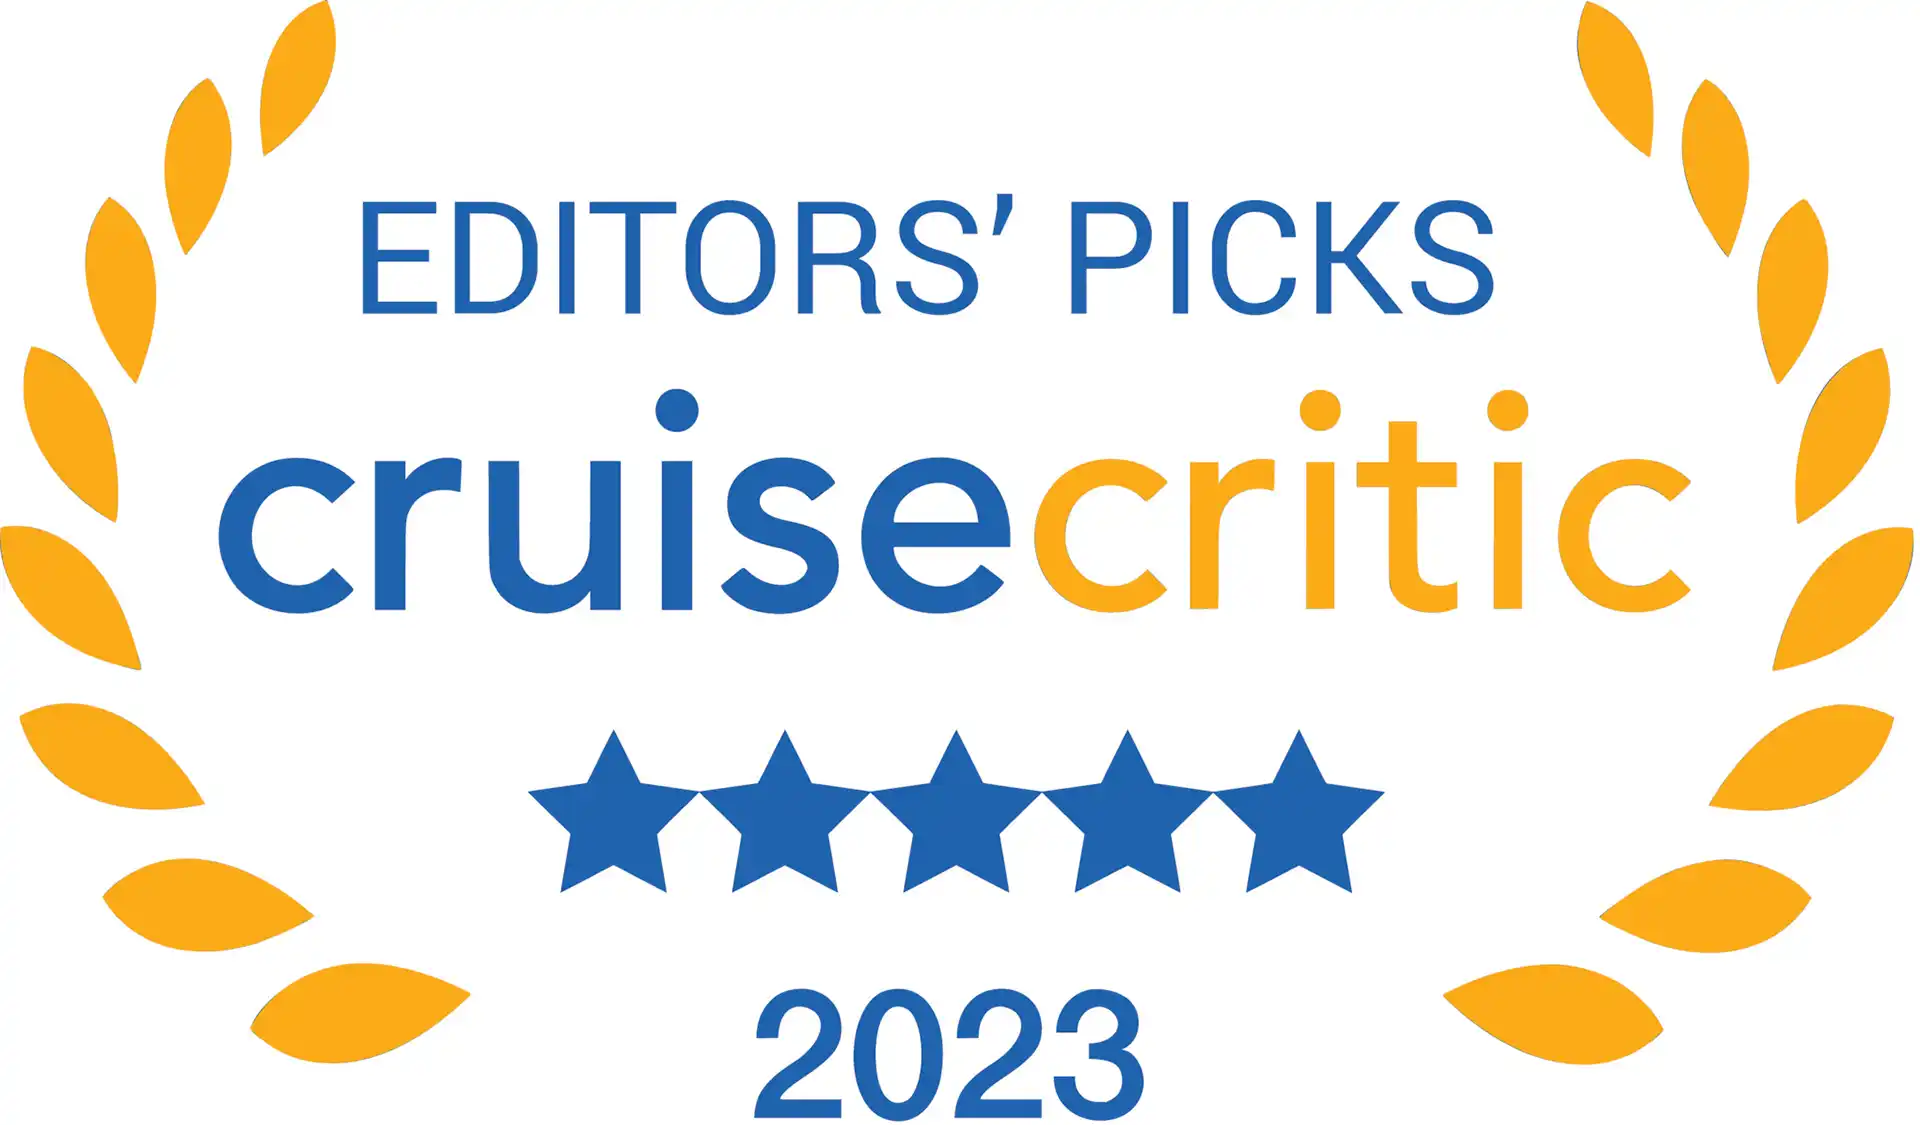 Cruise Critic Editor's Picks logo in orange and blue, recognizing Holland America Line for the 2023 Best Service Award.